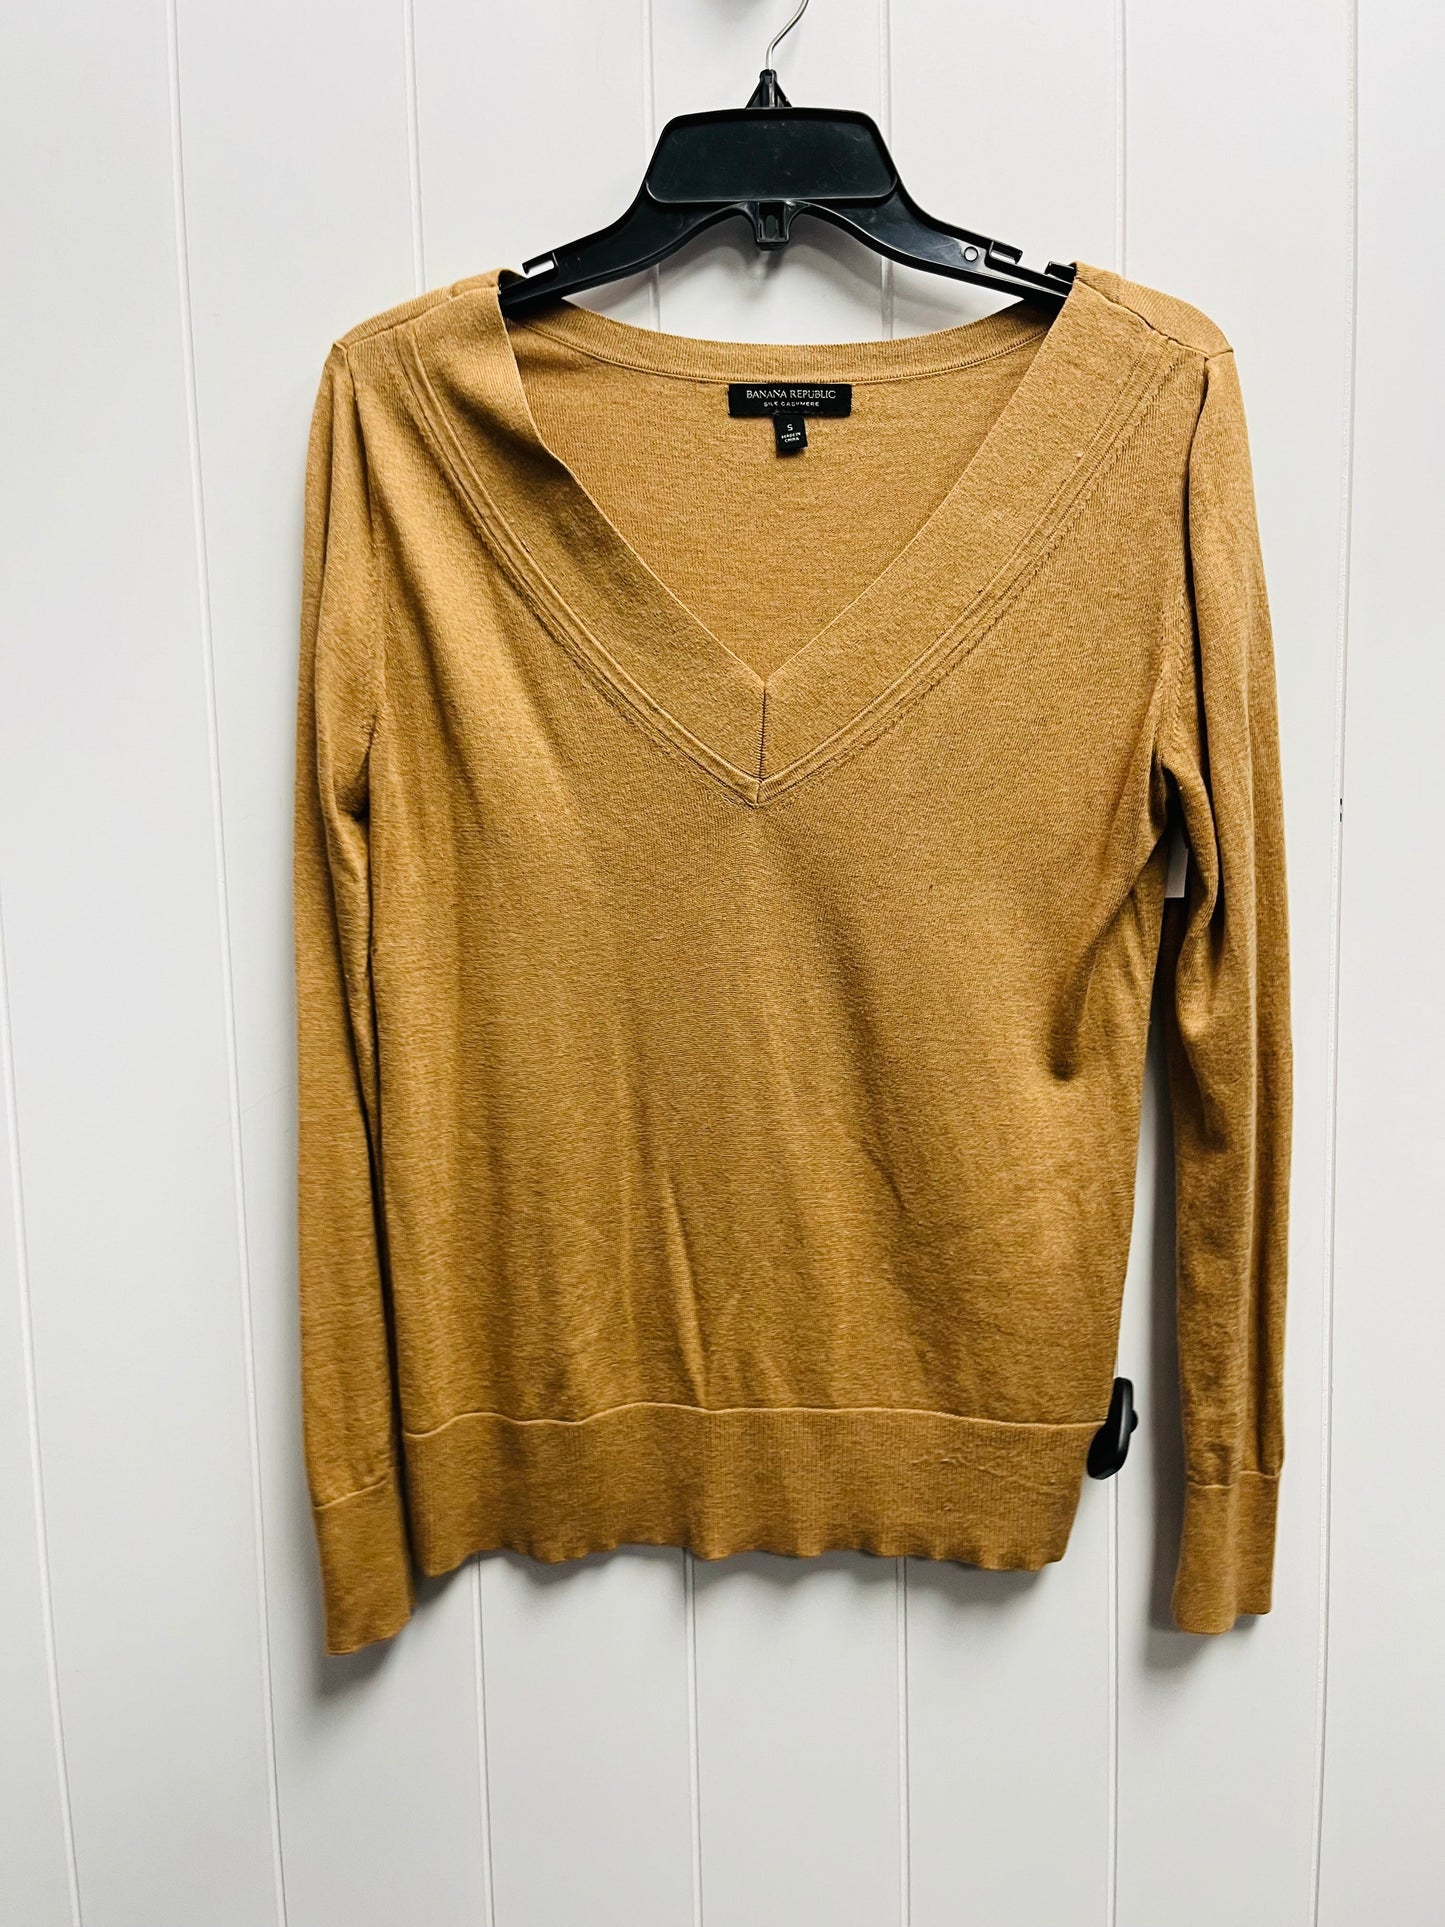 Brown Sweater Cashmere Banana Republic, Size S